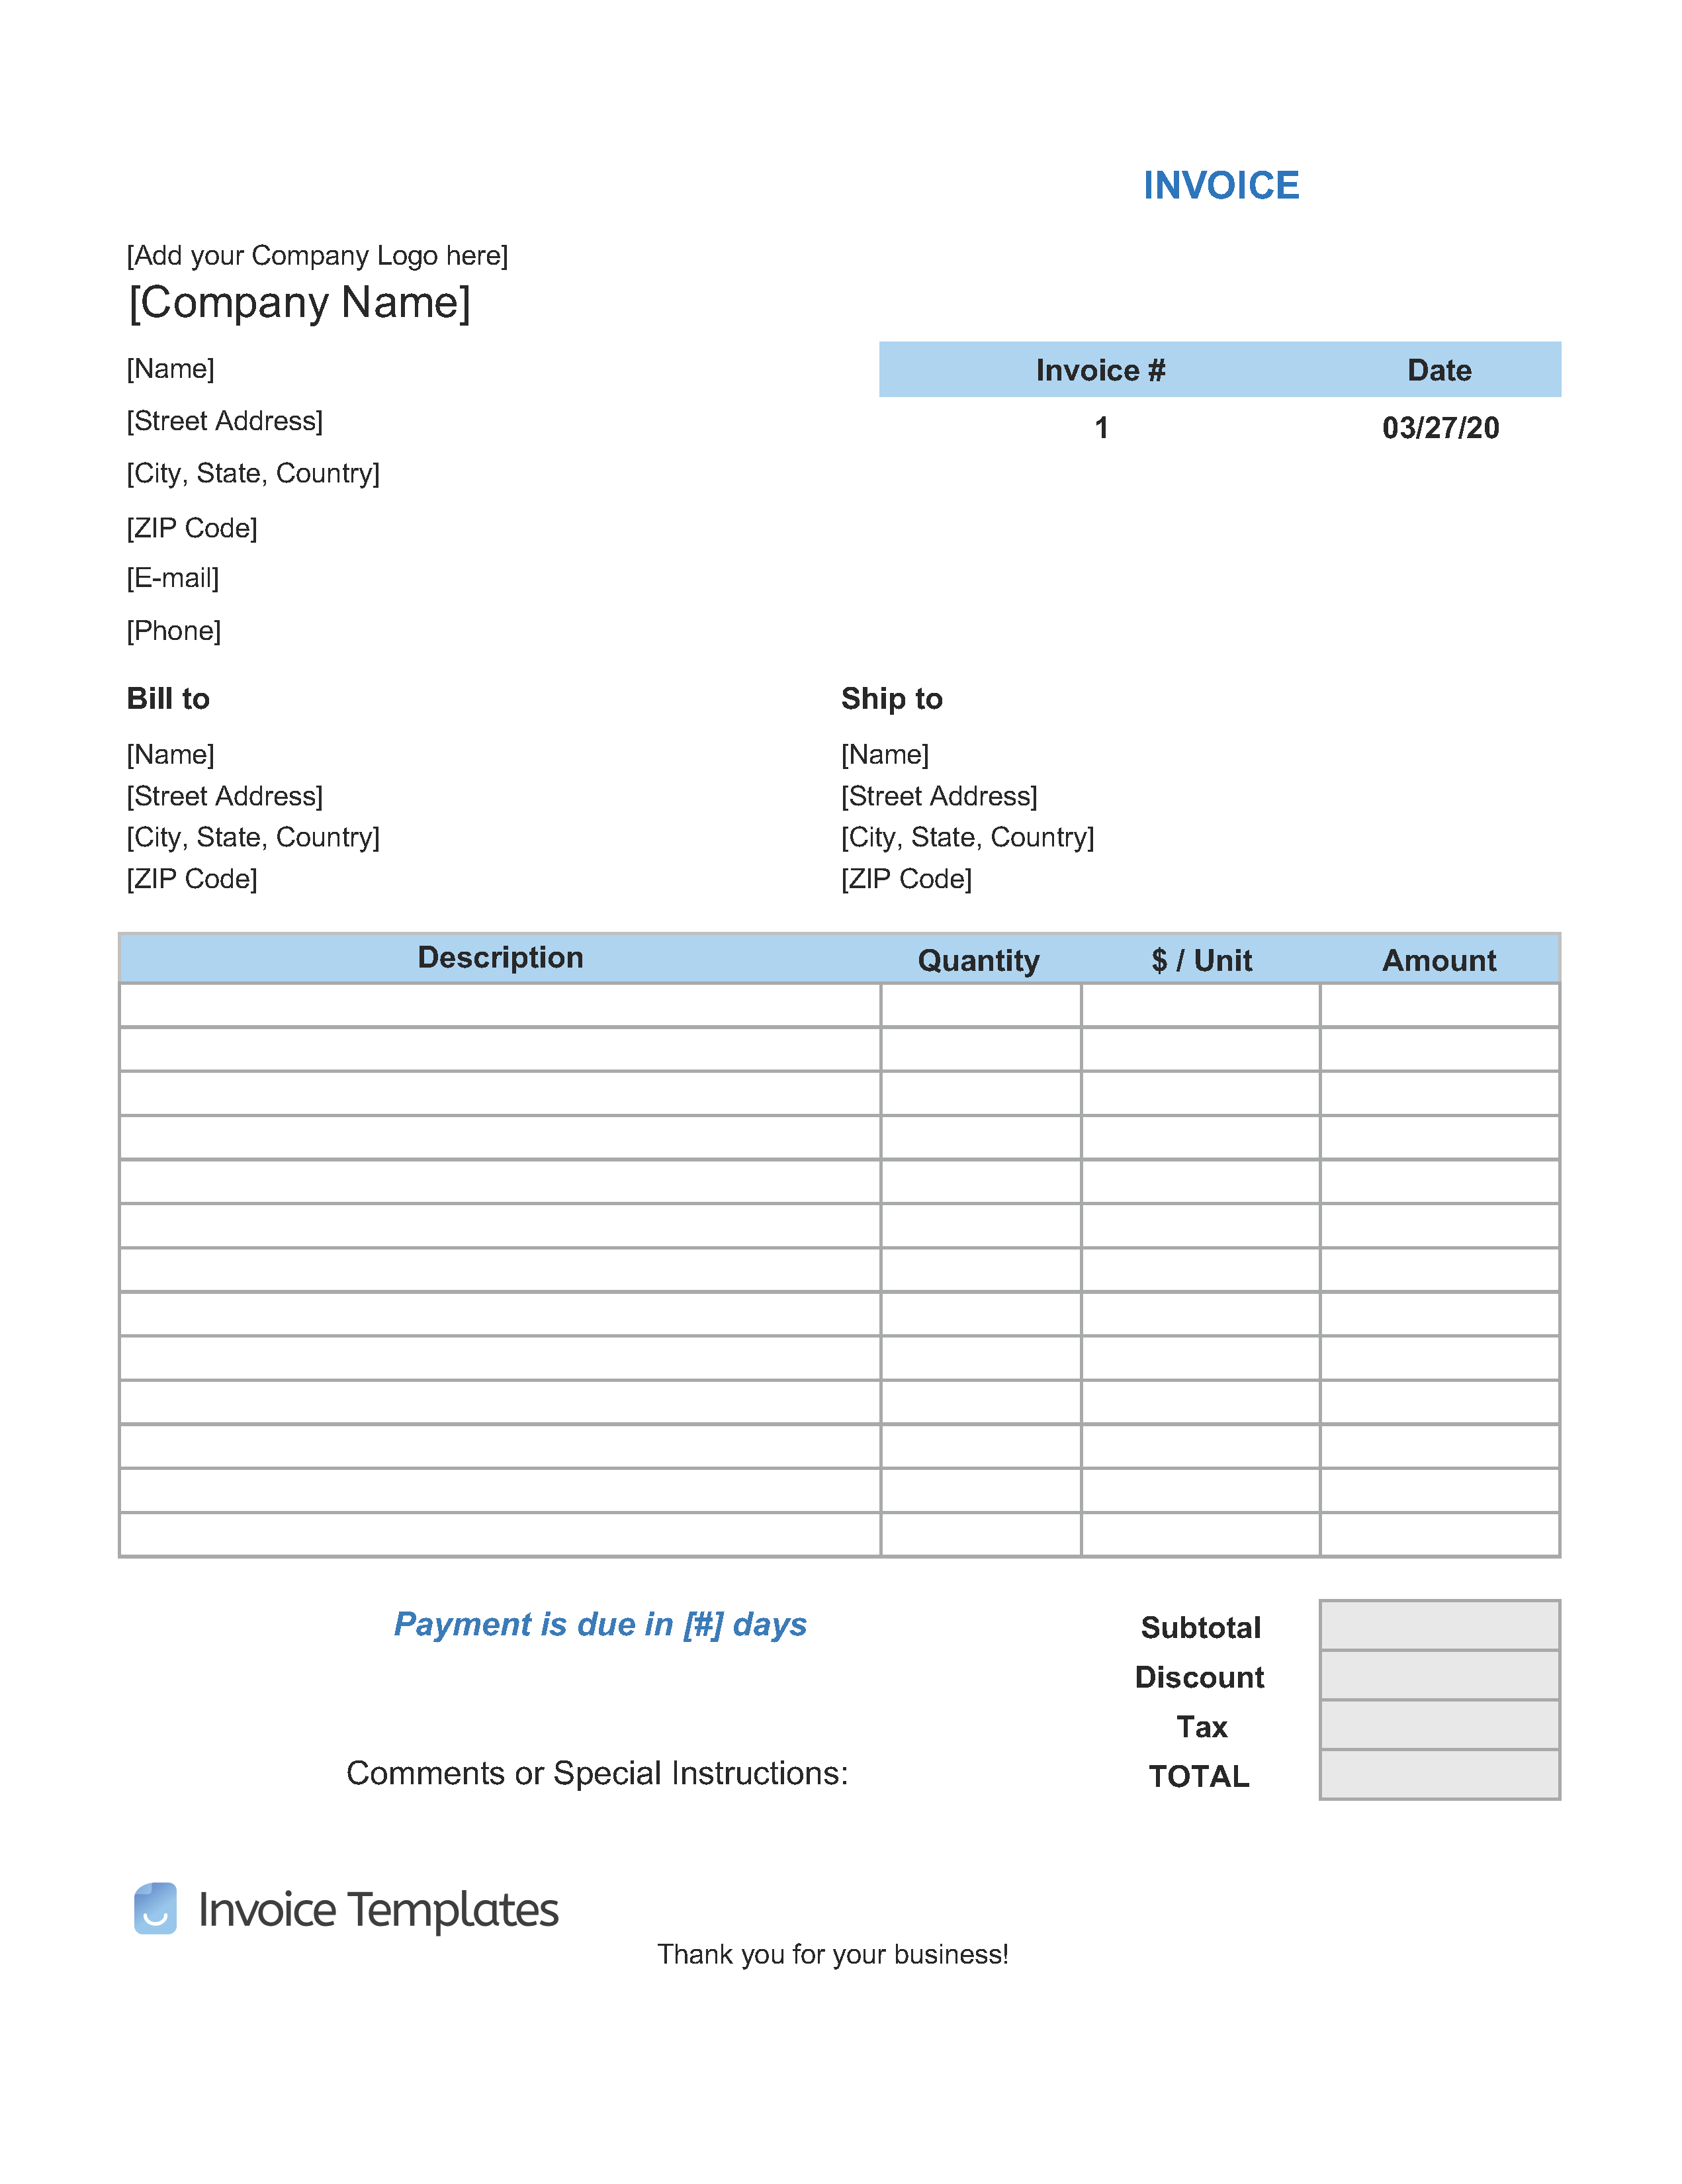 phone country code list excel In Excel Invoice Template 2003